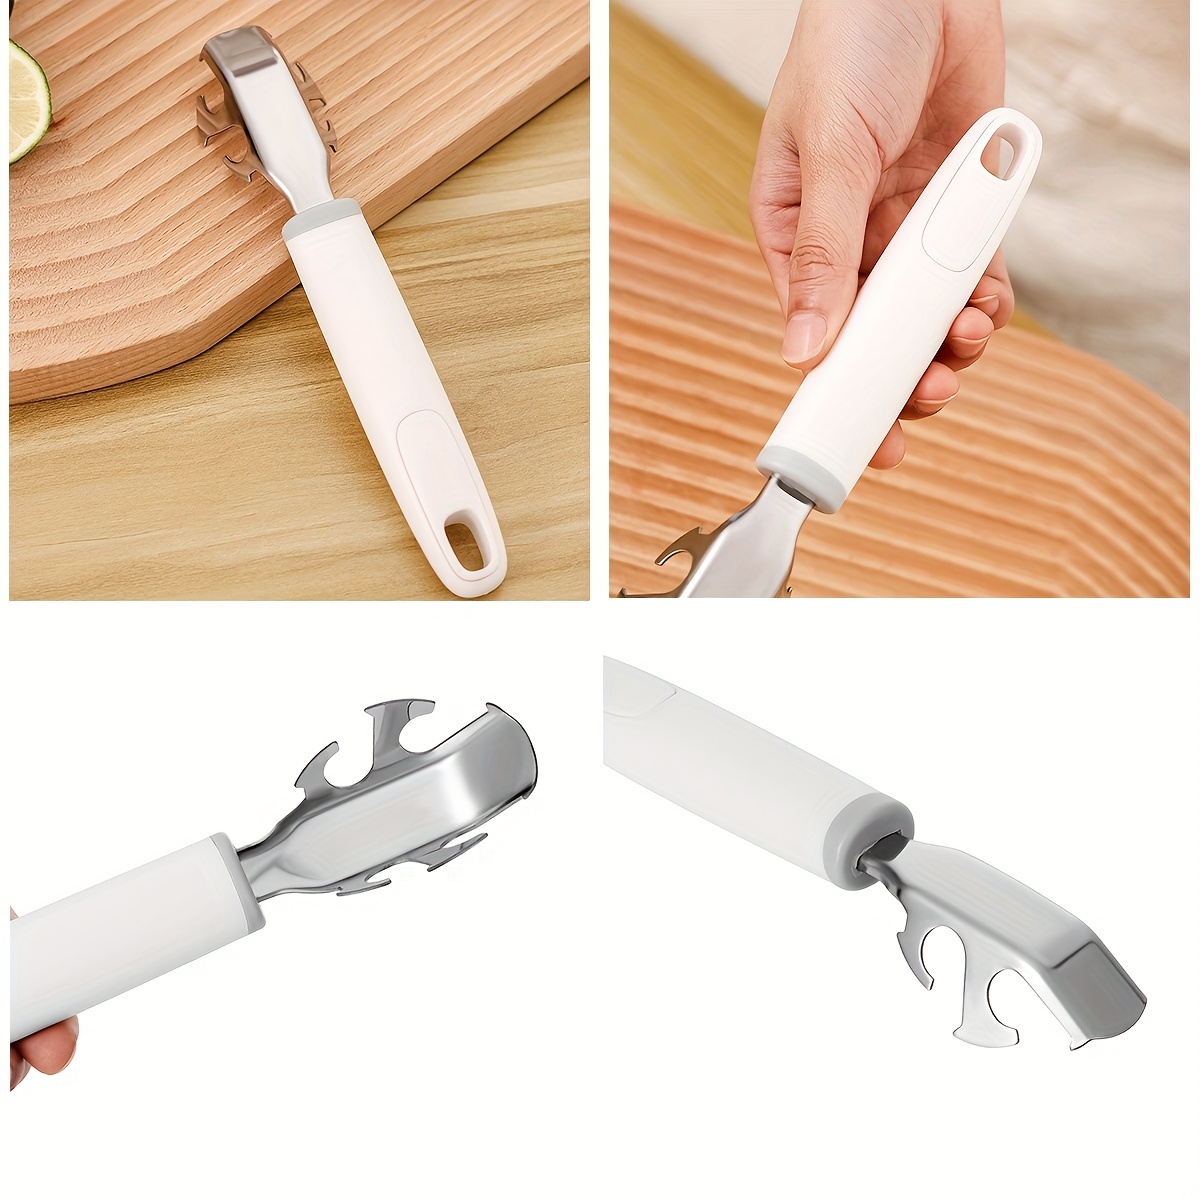  Hot Plate Gripper Stainless Steel Anti-Scalding Bowl Clip  Kitchen Home Multi-Function Plate Anti-Slip Disk Taker, hot Pads for  Kitchen Air Fryer Clip, Oven Steamer Retriever trivets Dishes 6PCS : Hogar y